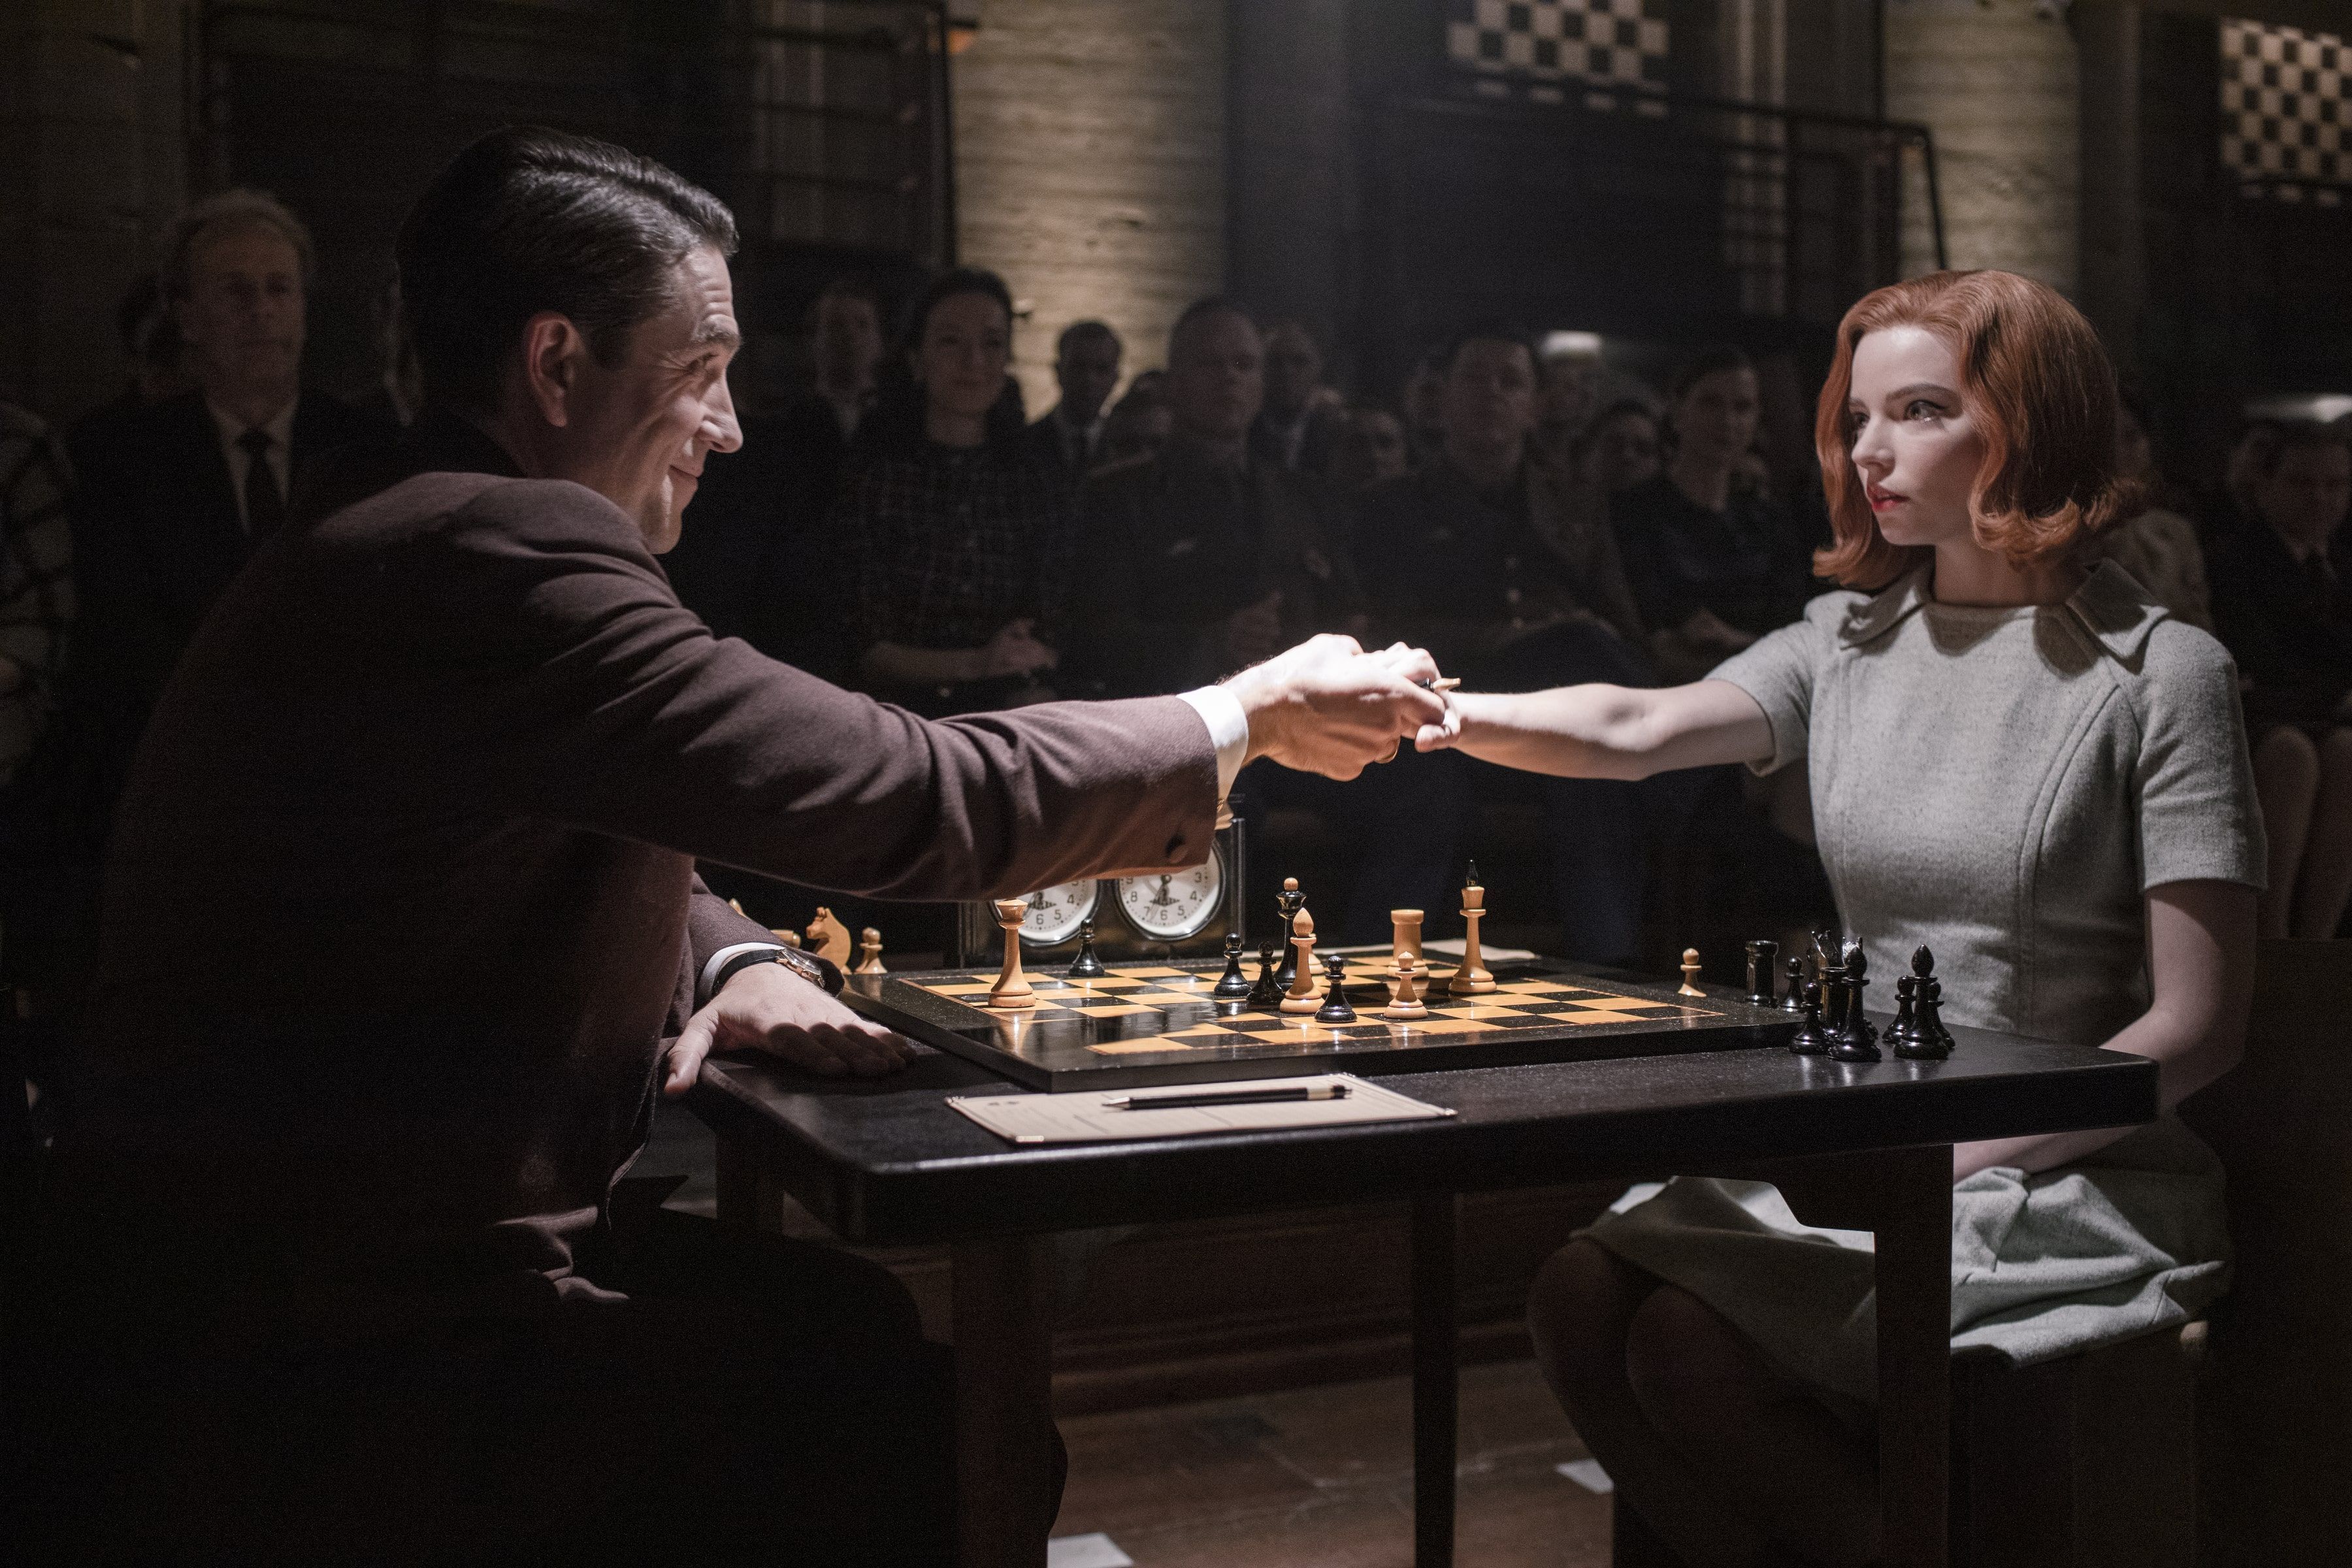 Is 'The Queen's Gambit' Based on a True Story? - Beth Harmon in